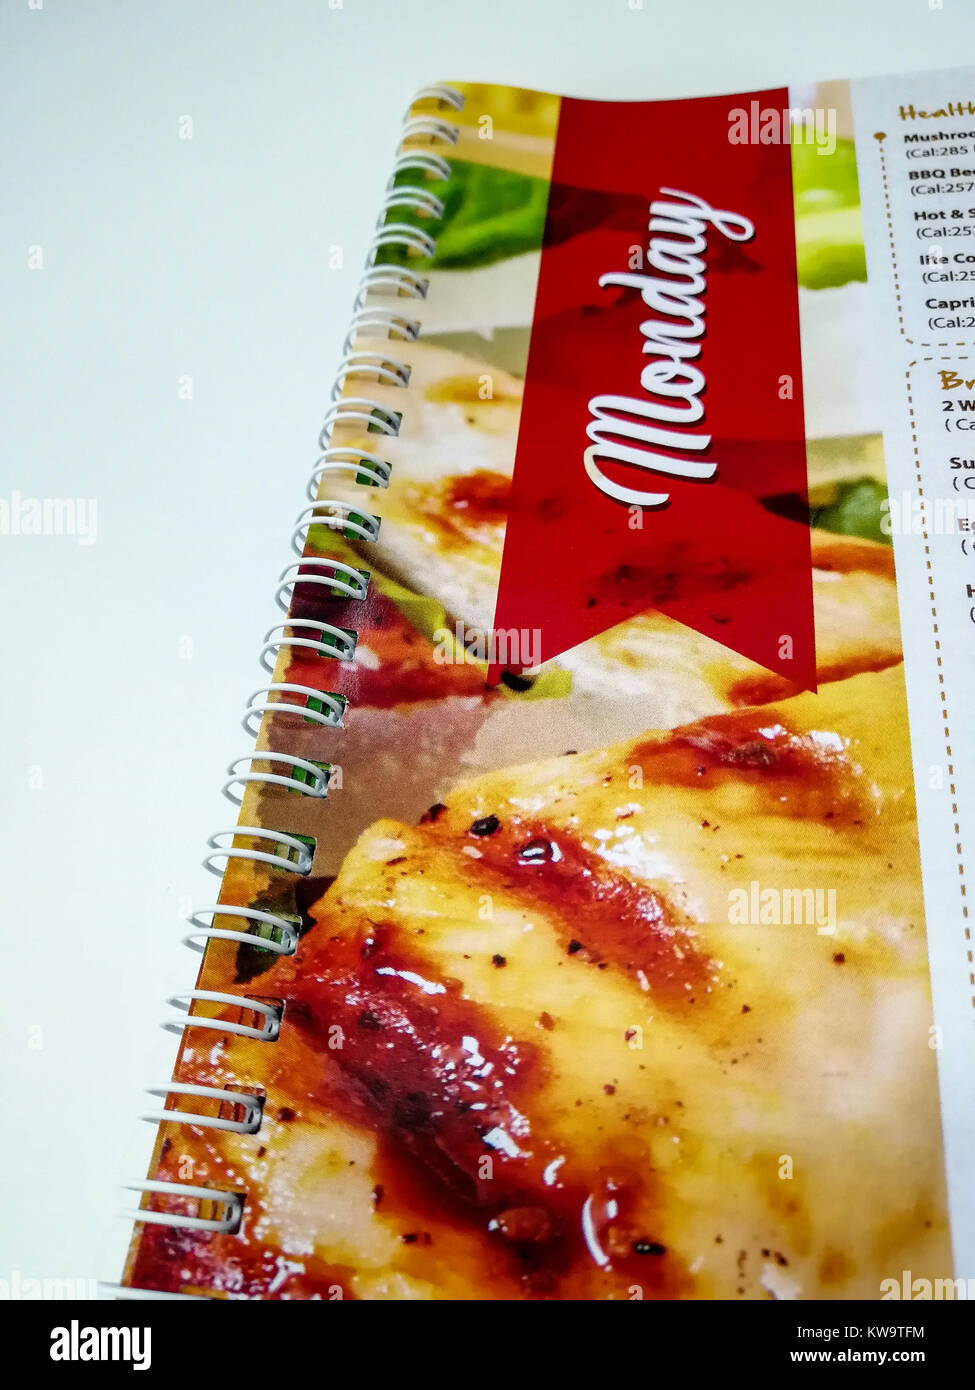 Spiral book binding with red color and chicken pictures having Monday written having white background white spiral binding Stock Photo